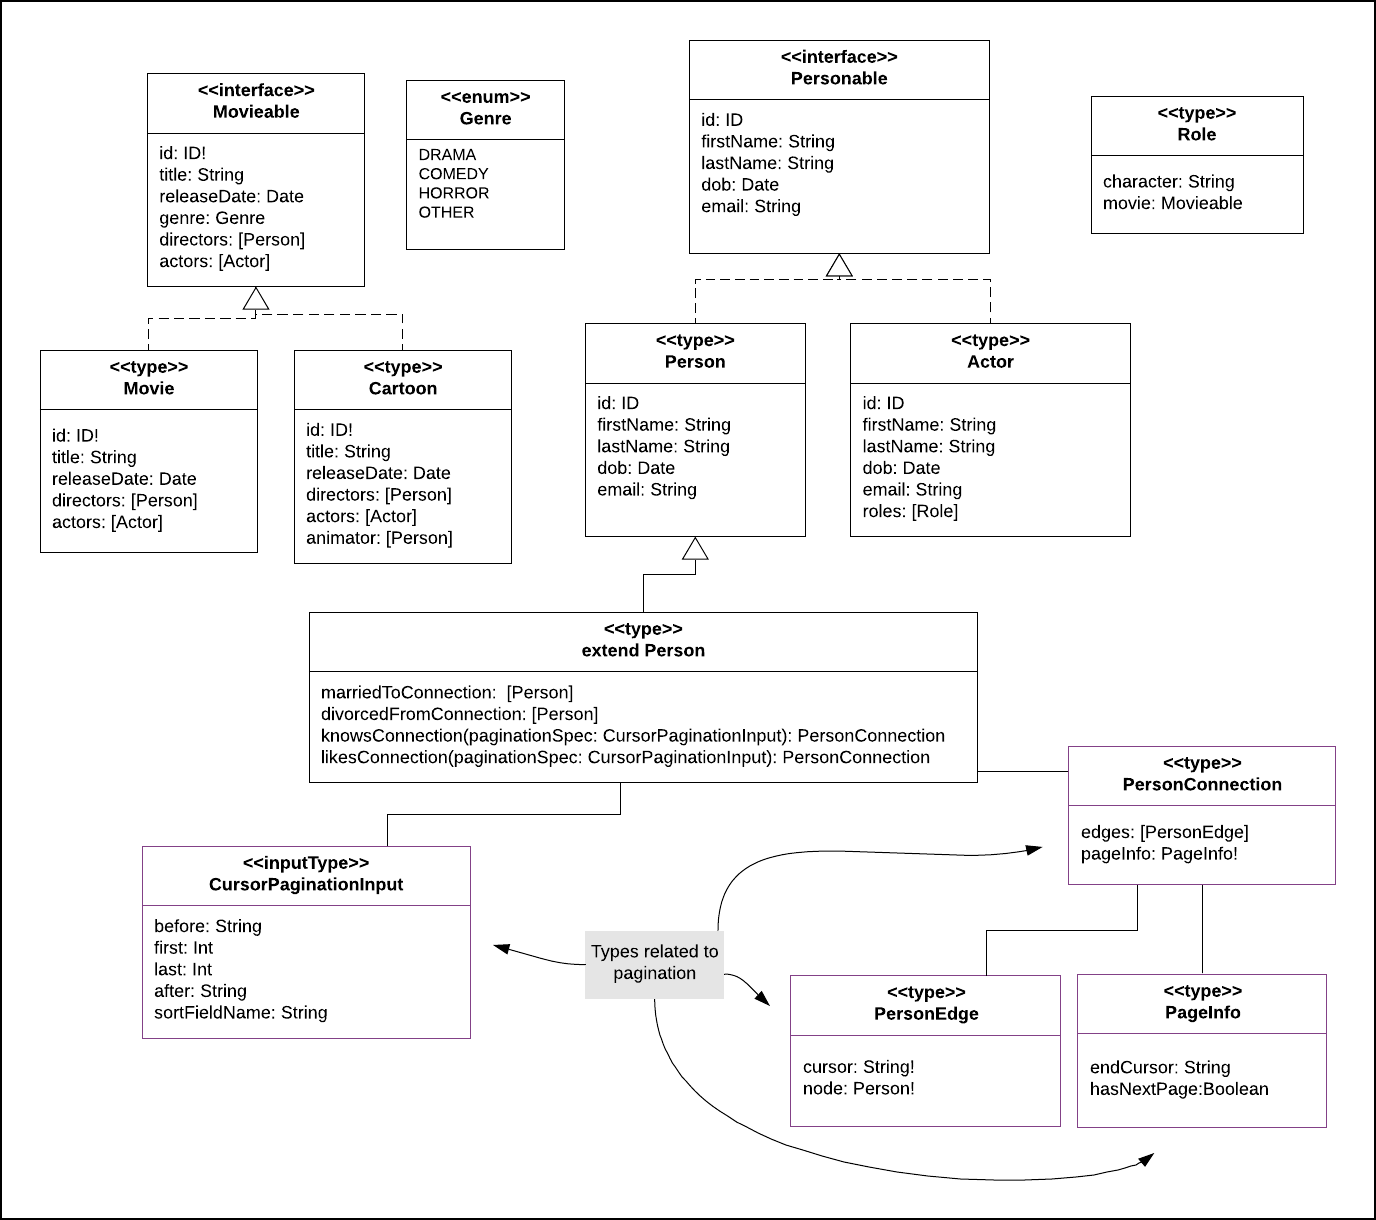 Figure 3: A description of some of the GraphQL interfaces, types and inputTypes represented in UML (Unified Modeling Language)